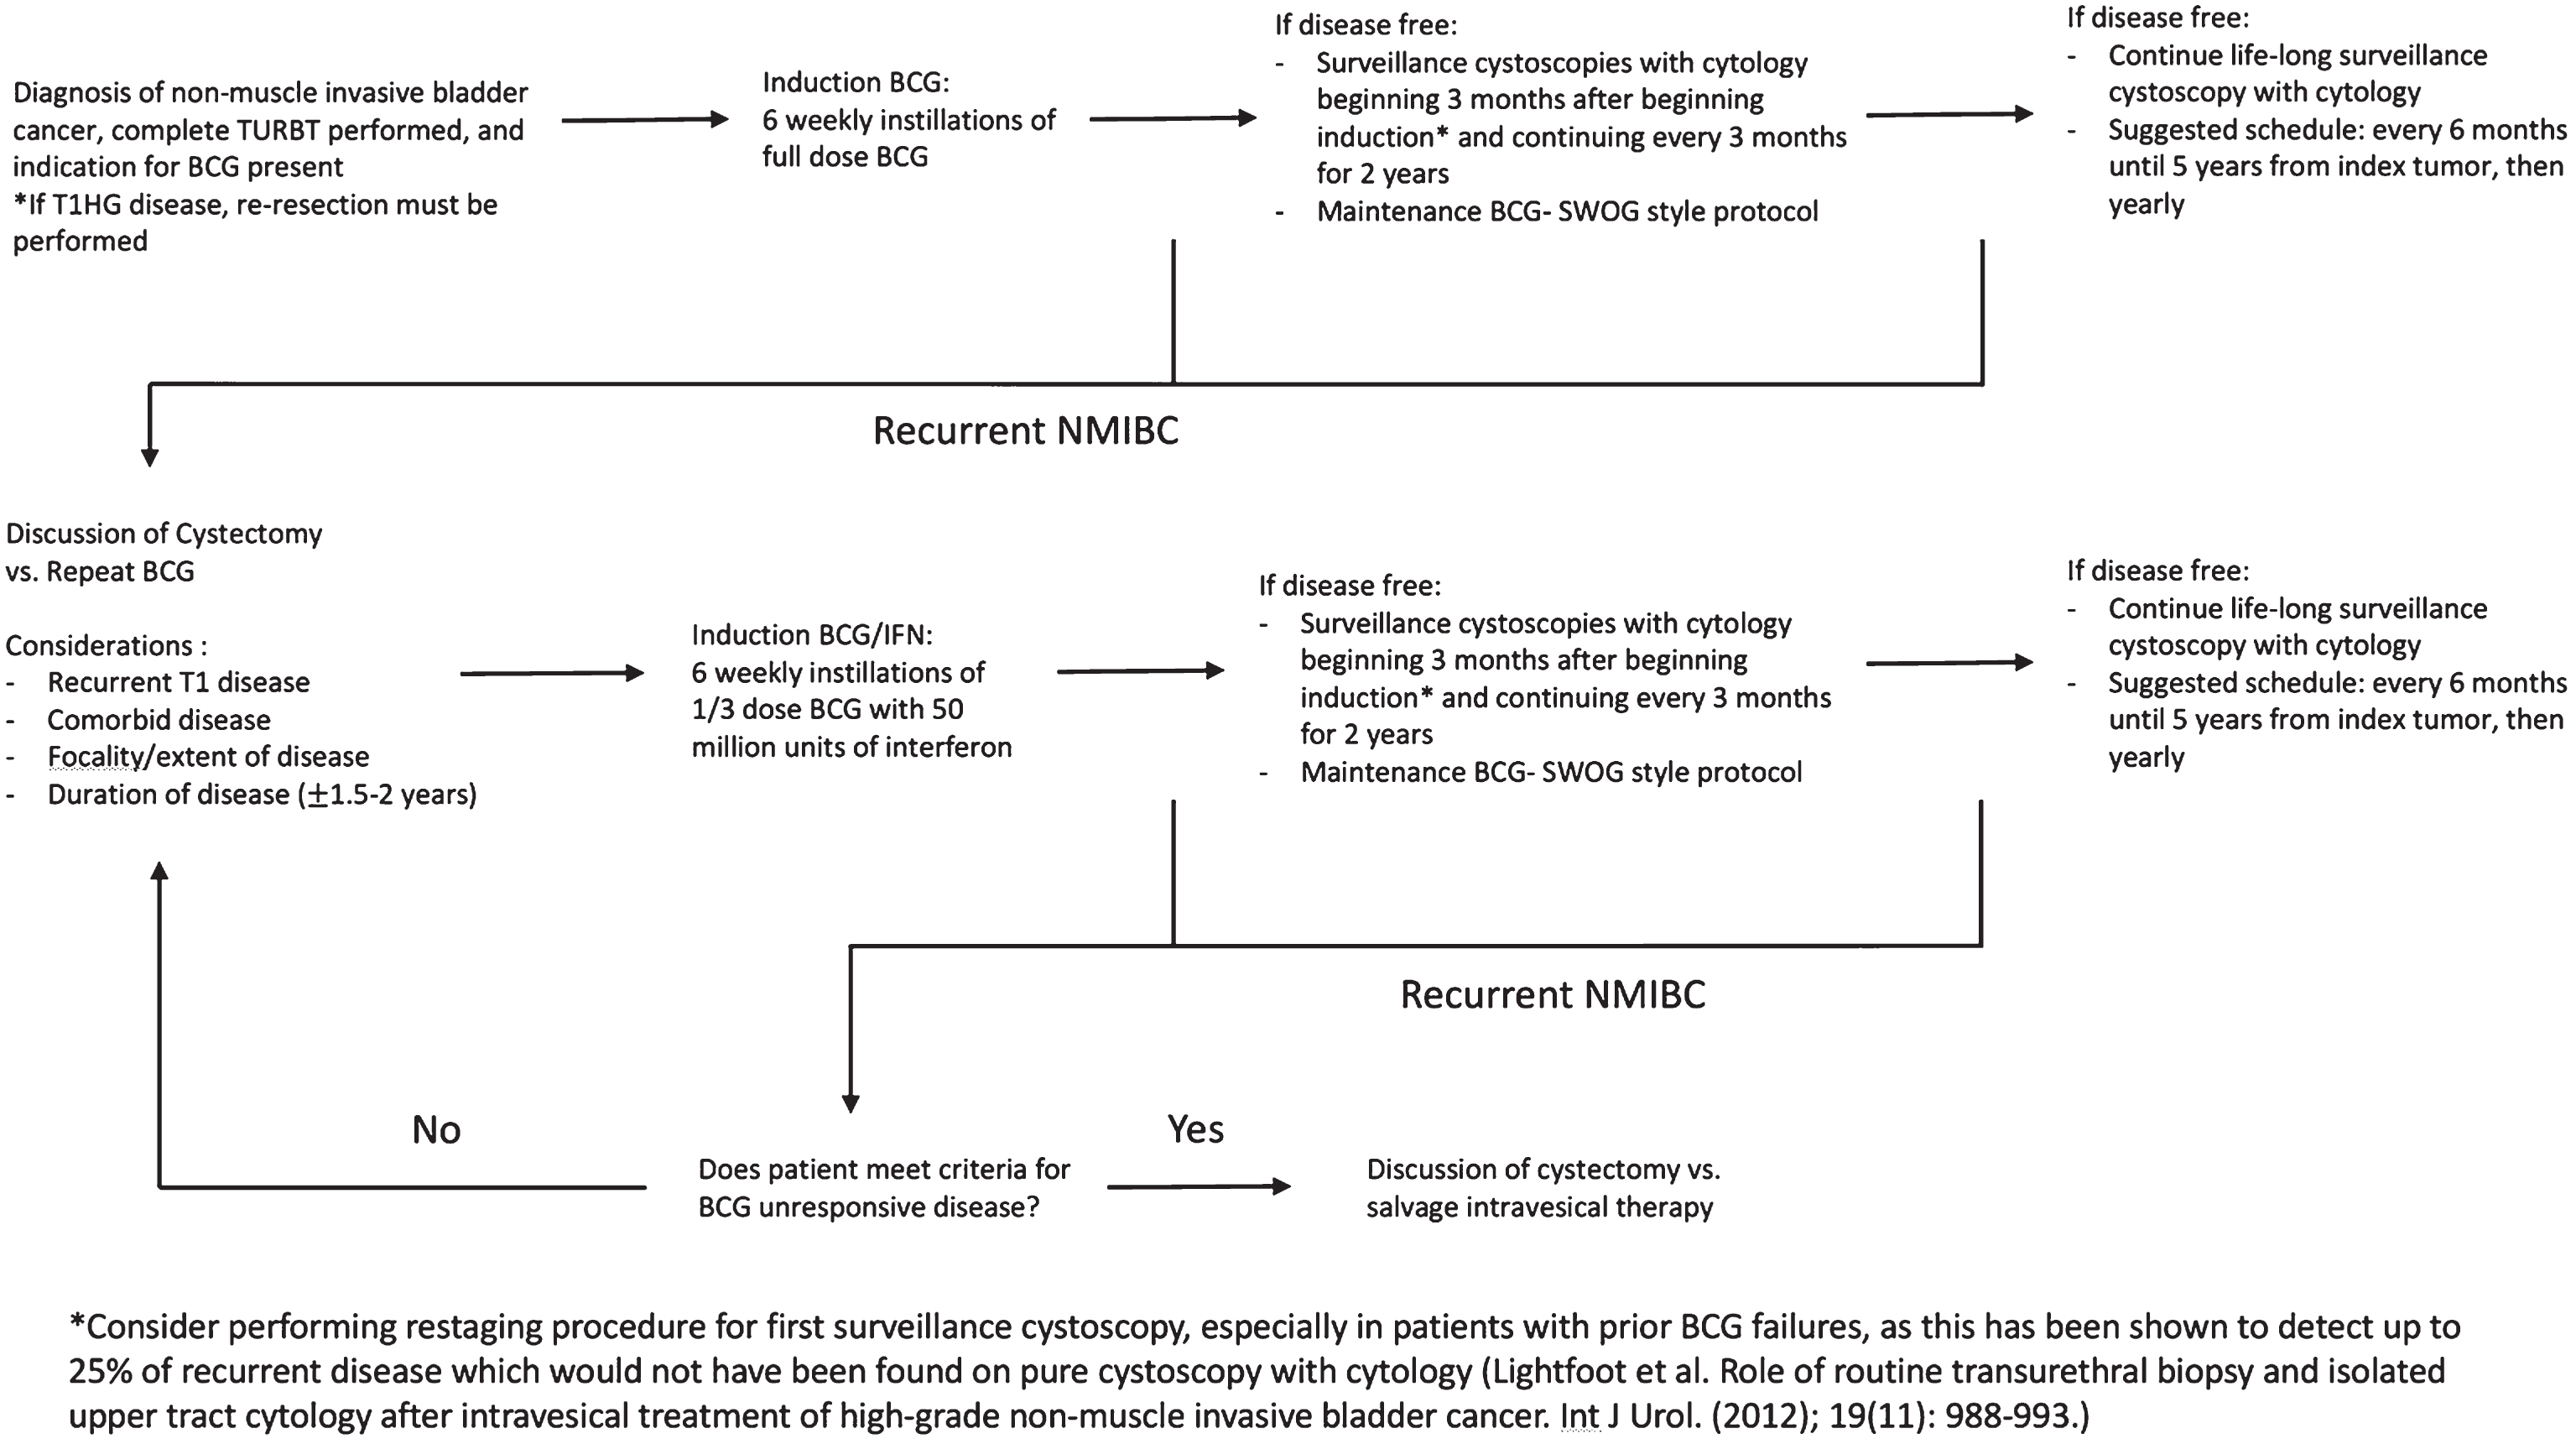 Proposed treatment algorithm for patients with non-muscle invasive bladder cancer.